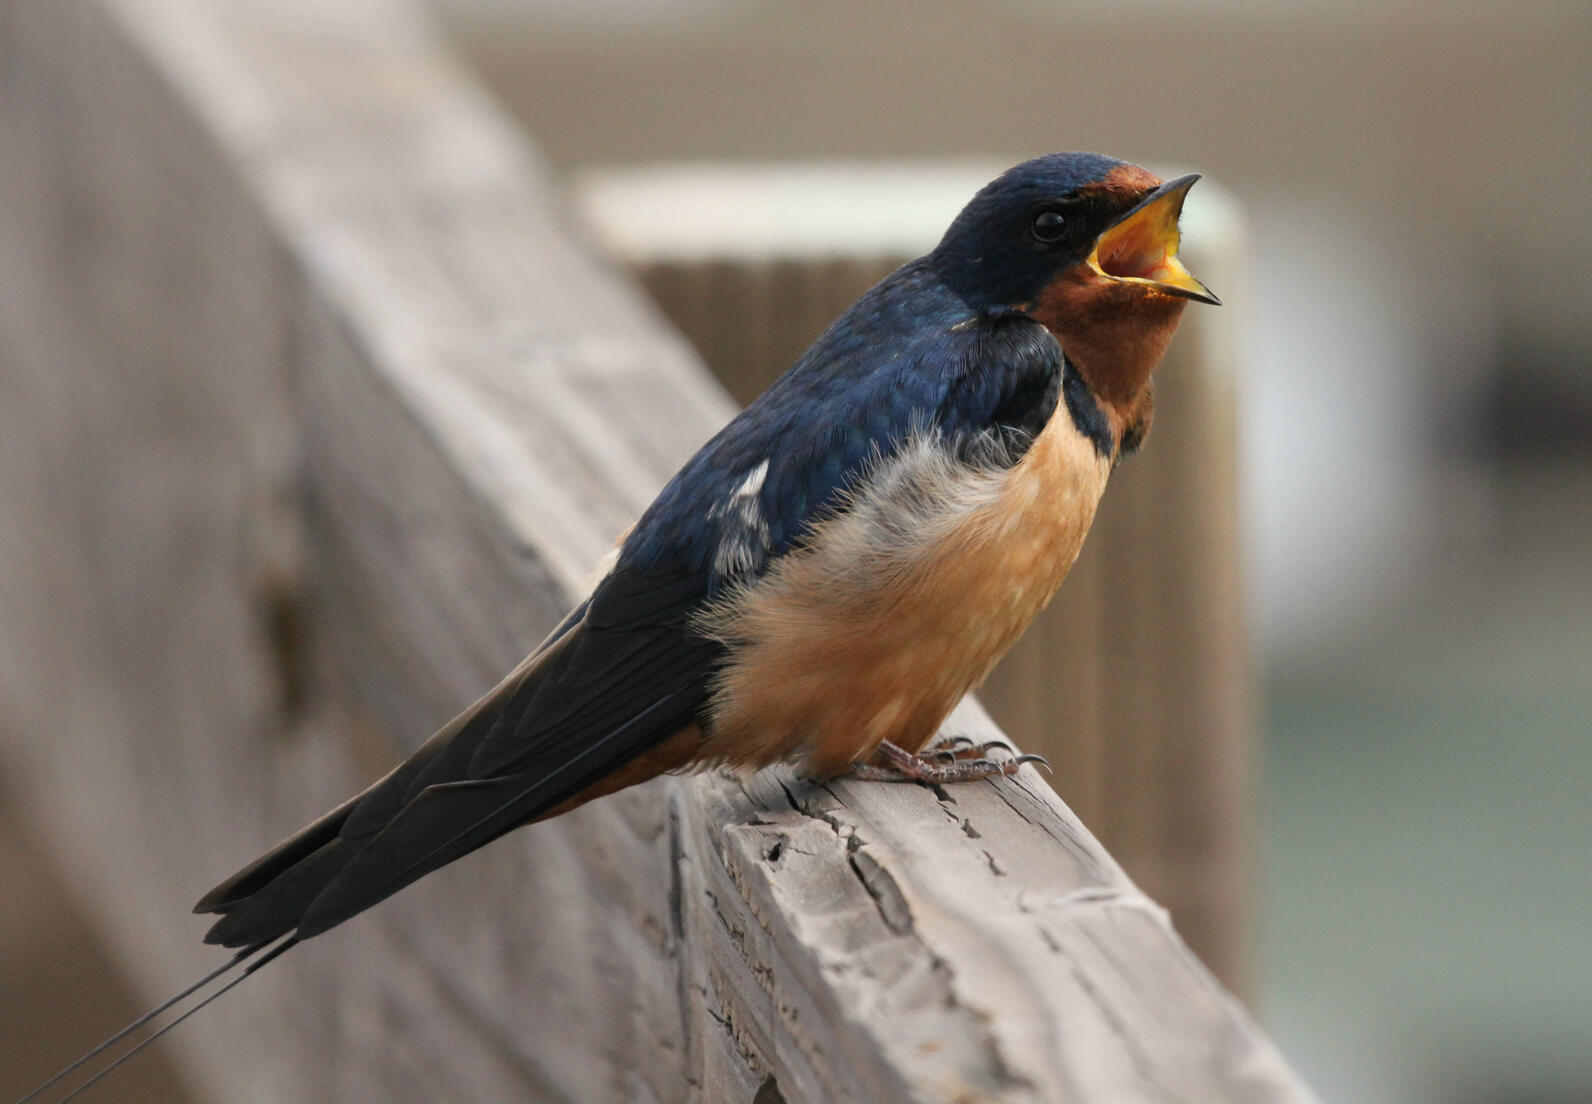 A closeup of a Barn Swallow sitting on a wooden fence railing. It's mouth is open in song.